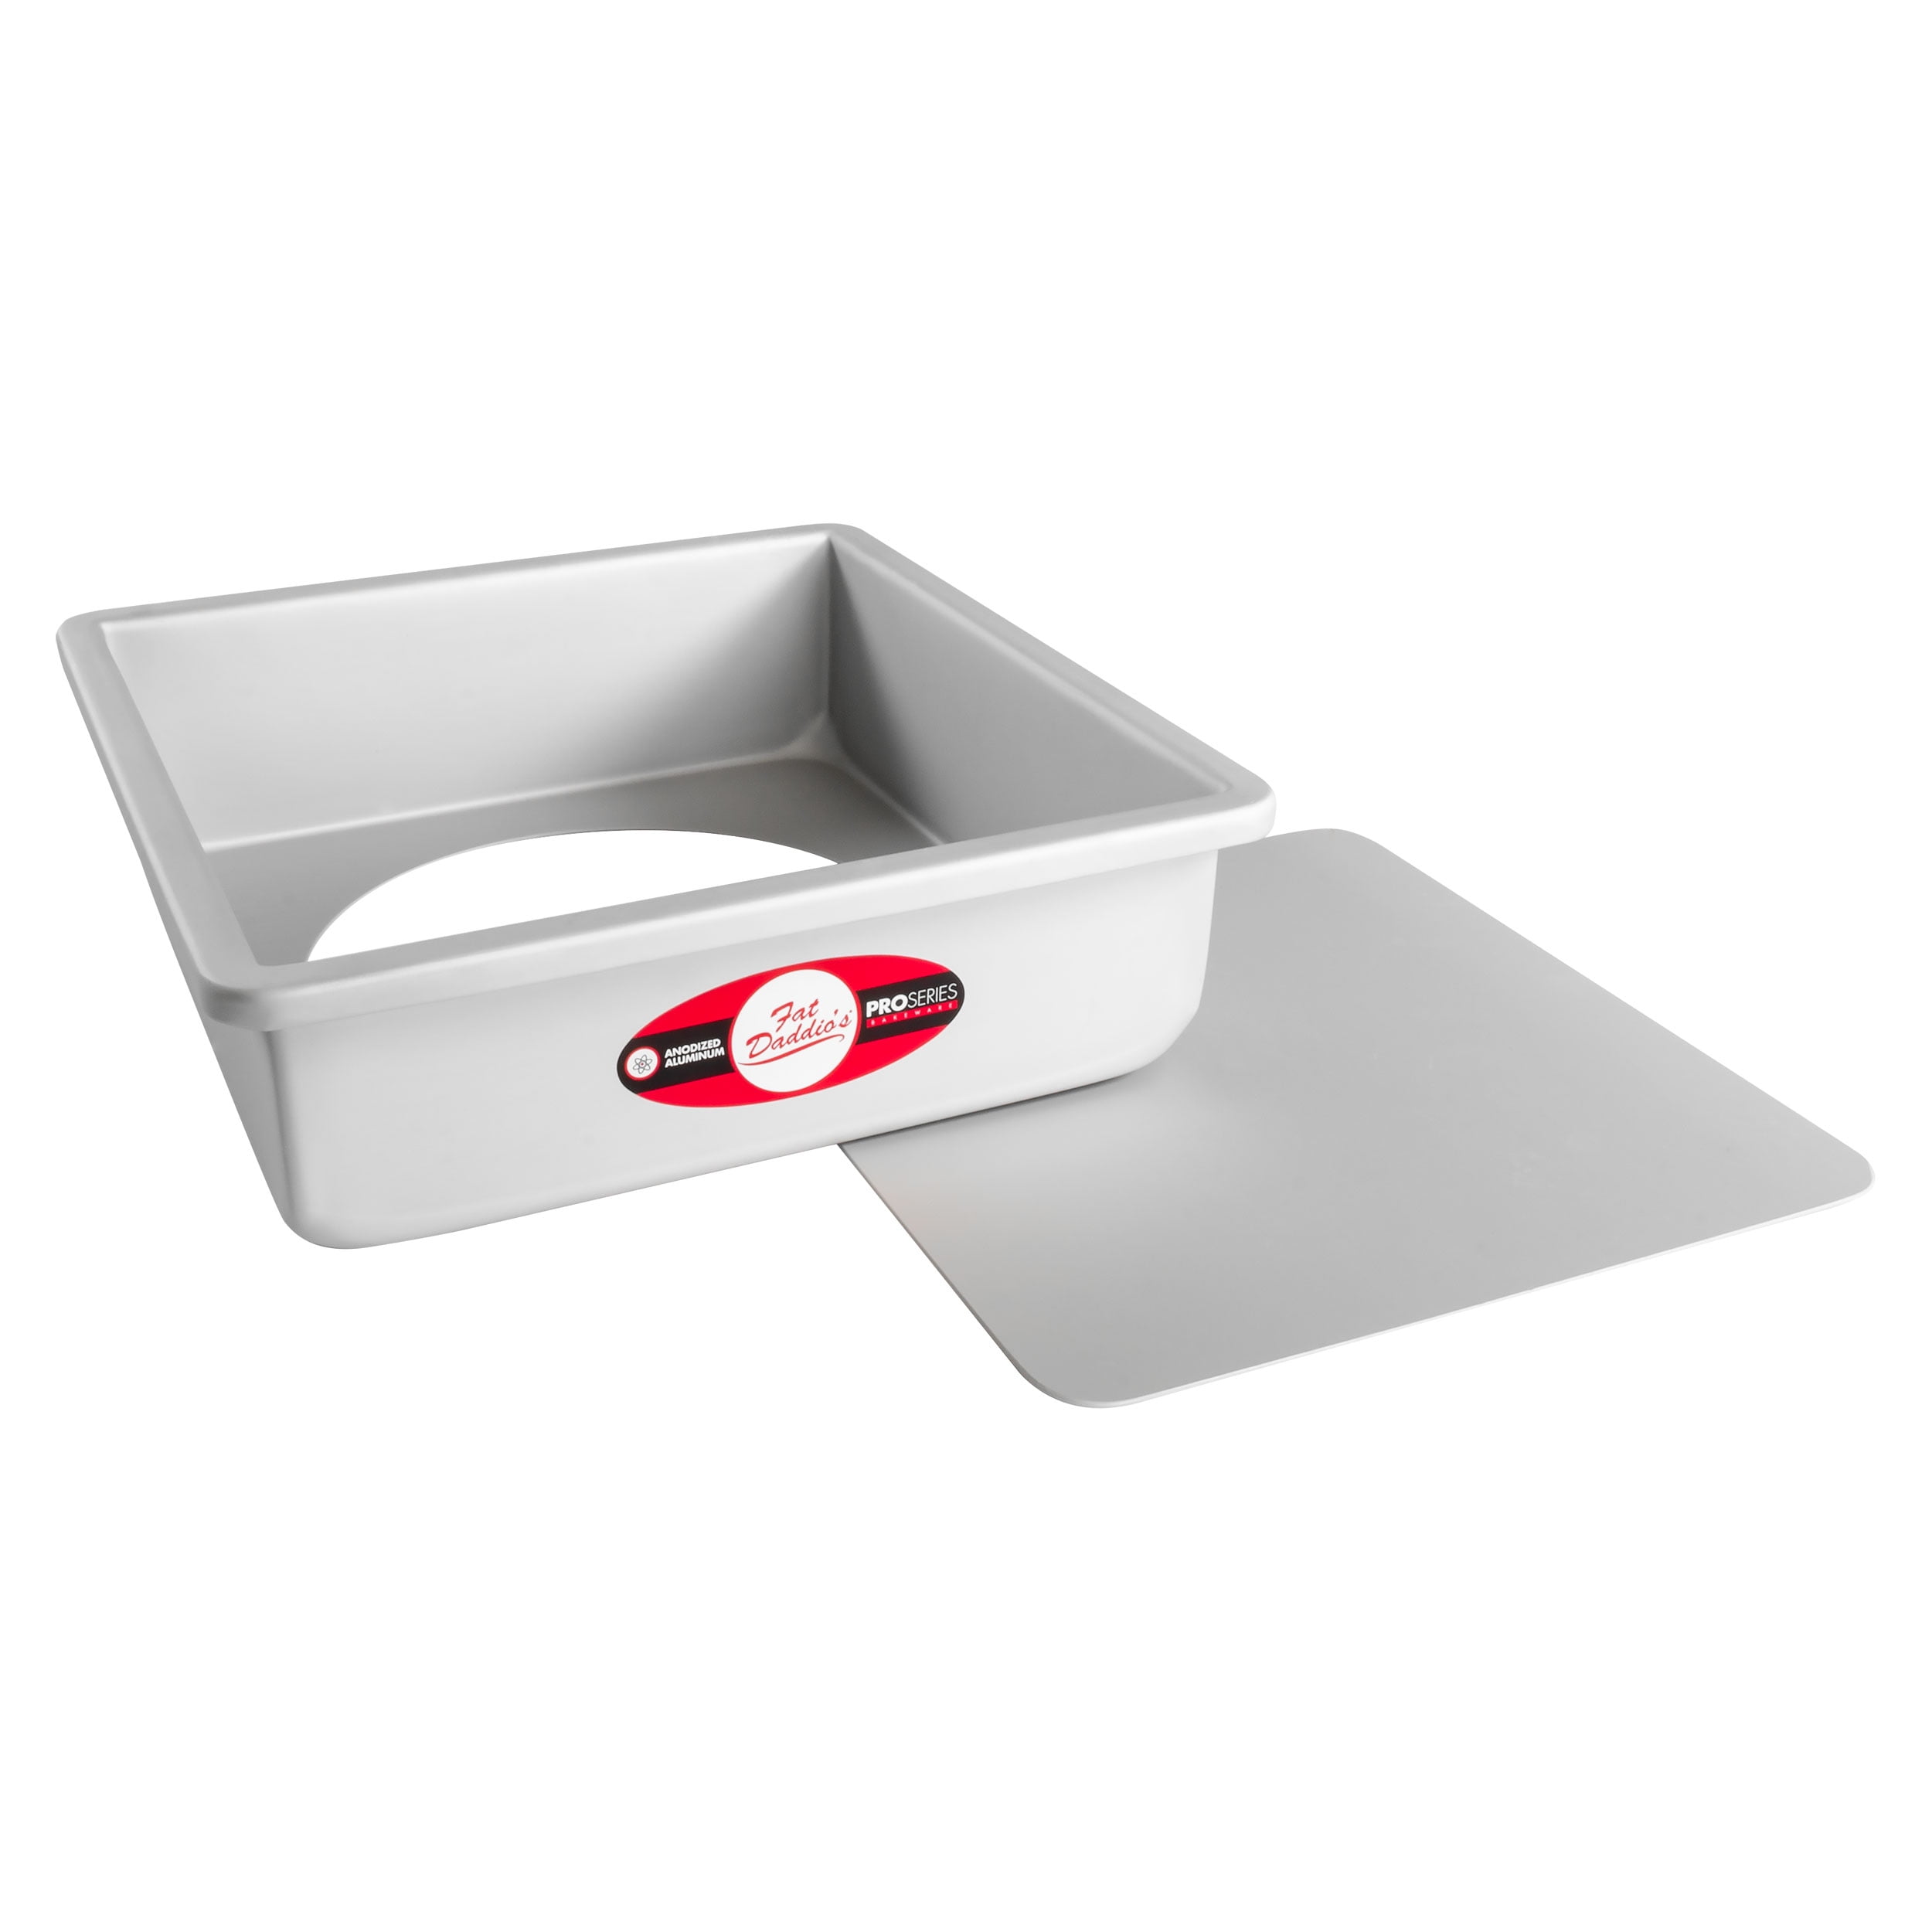 Fat Daddio's 7in x 3in Removable Bottom Cake Pan